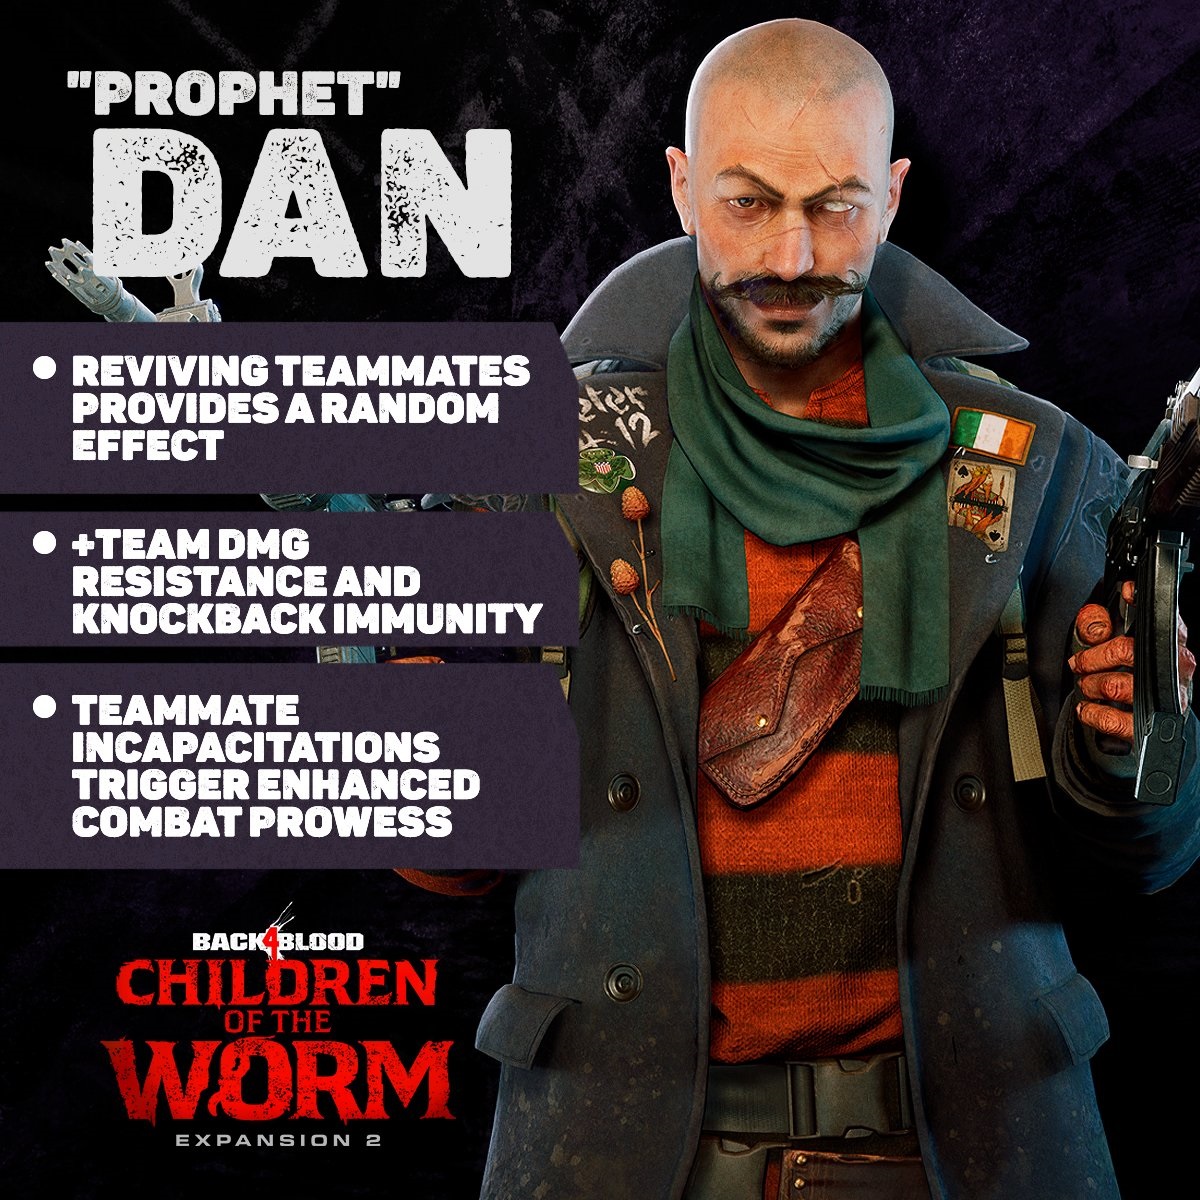 The new cleaner, Prophet Dan is a prime starting point for a medic/revive build with his knockback immunity.